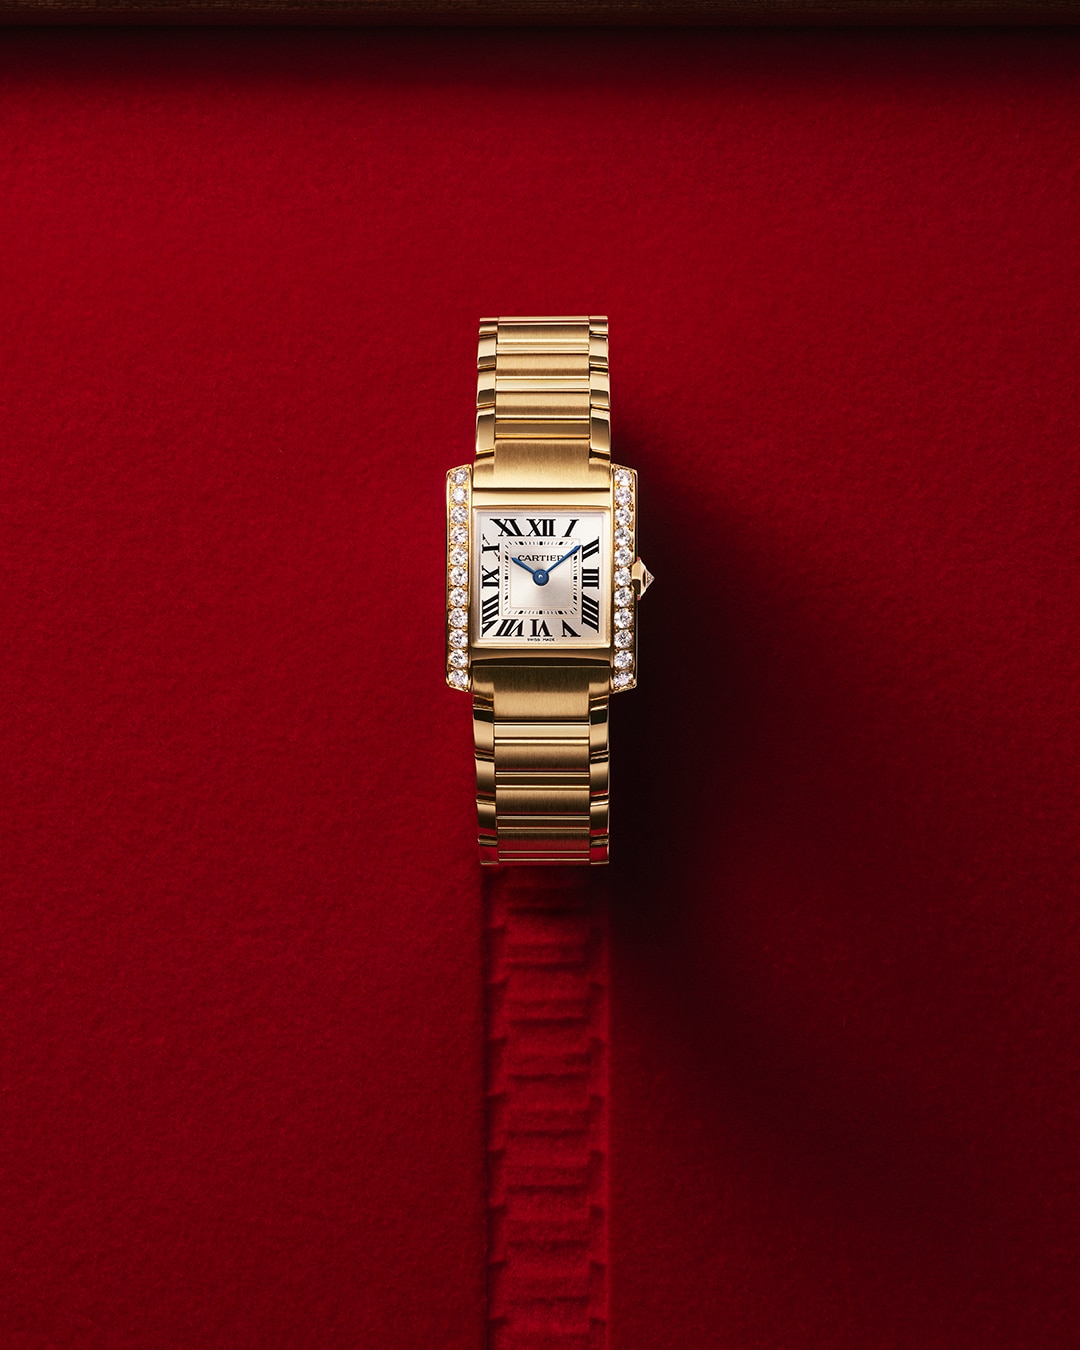 THE TANK WATCH BY CARTIER